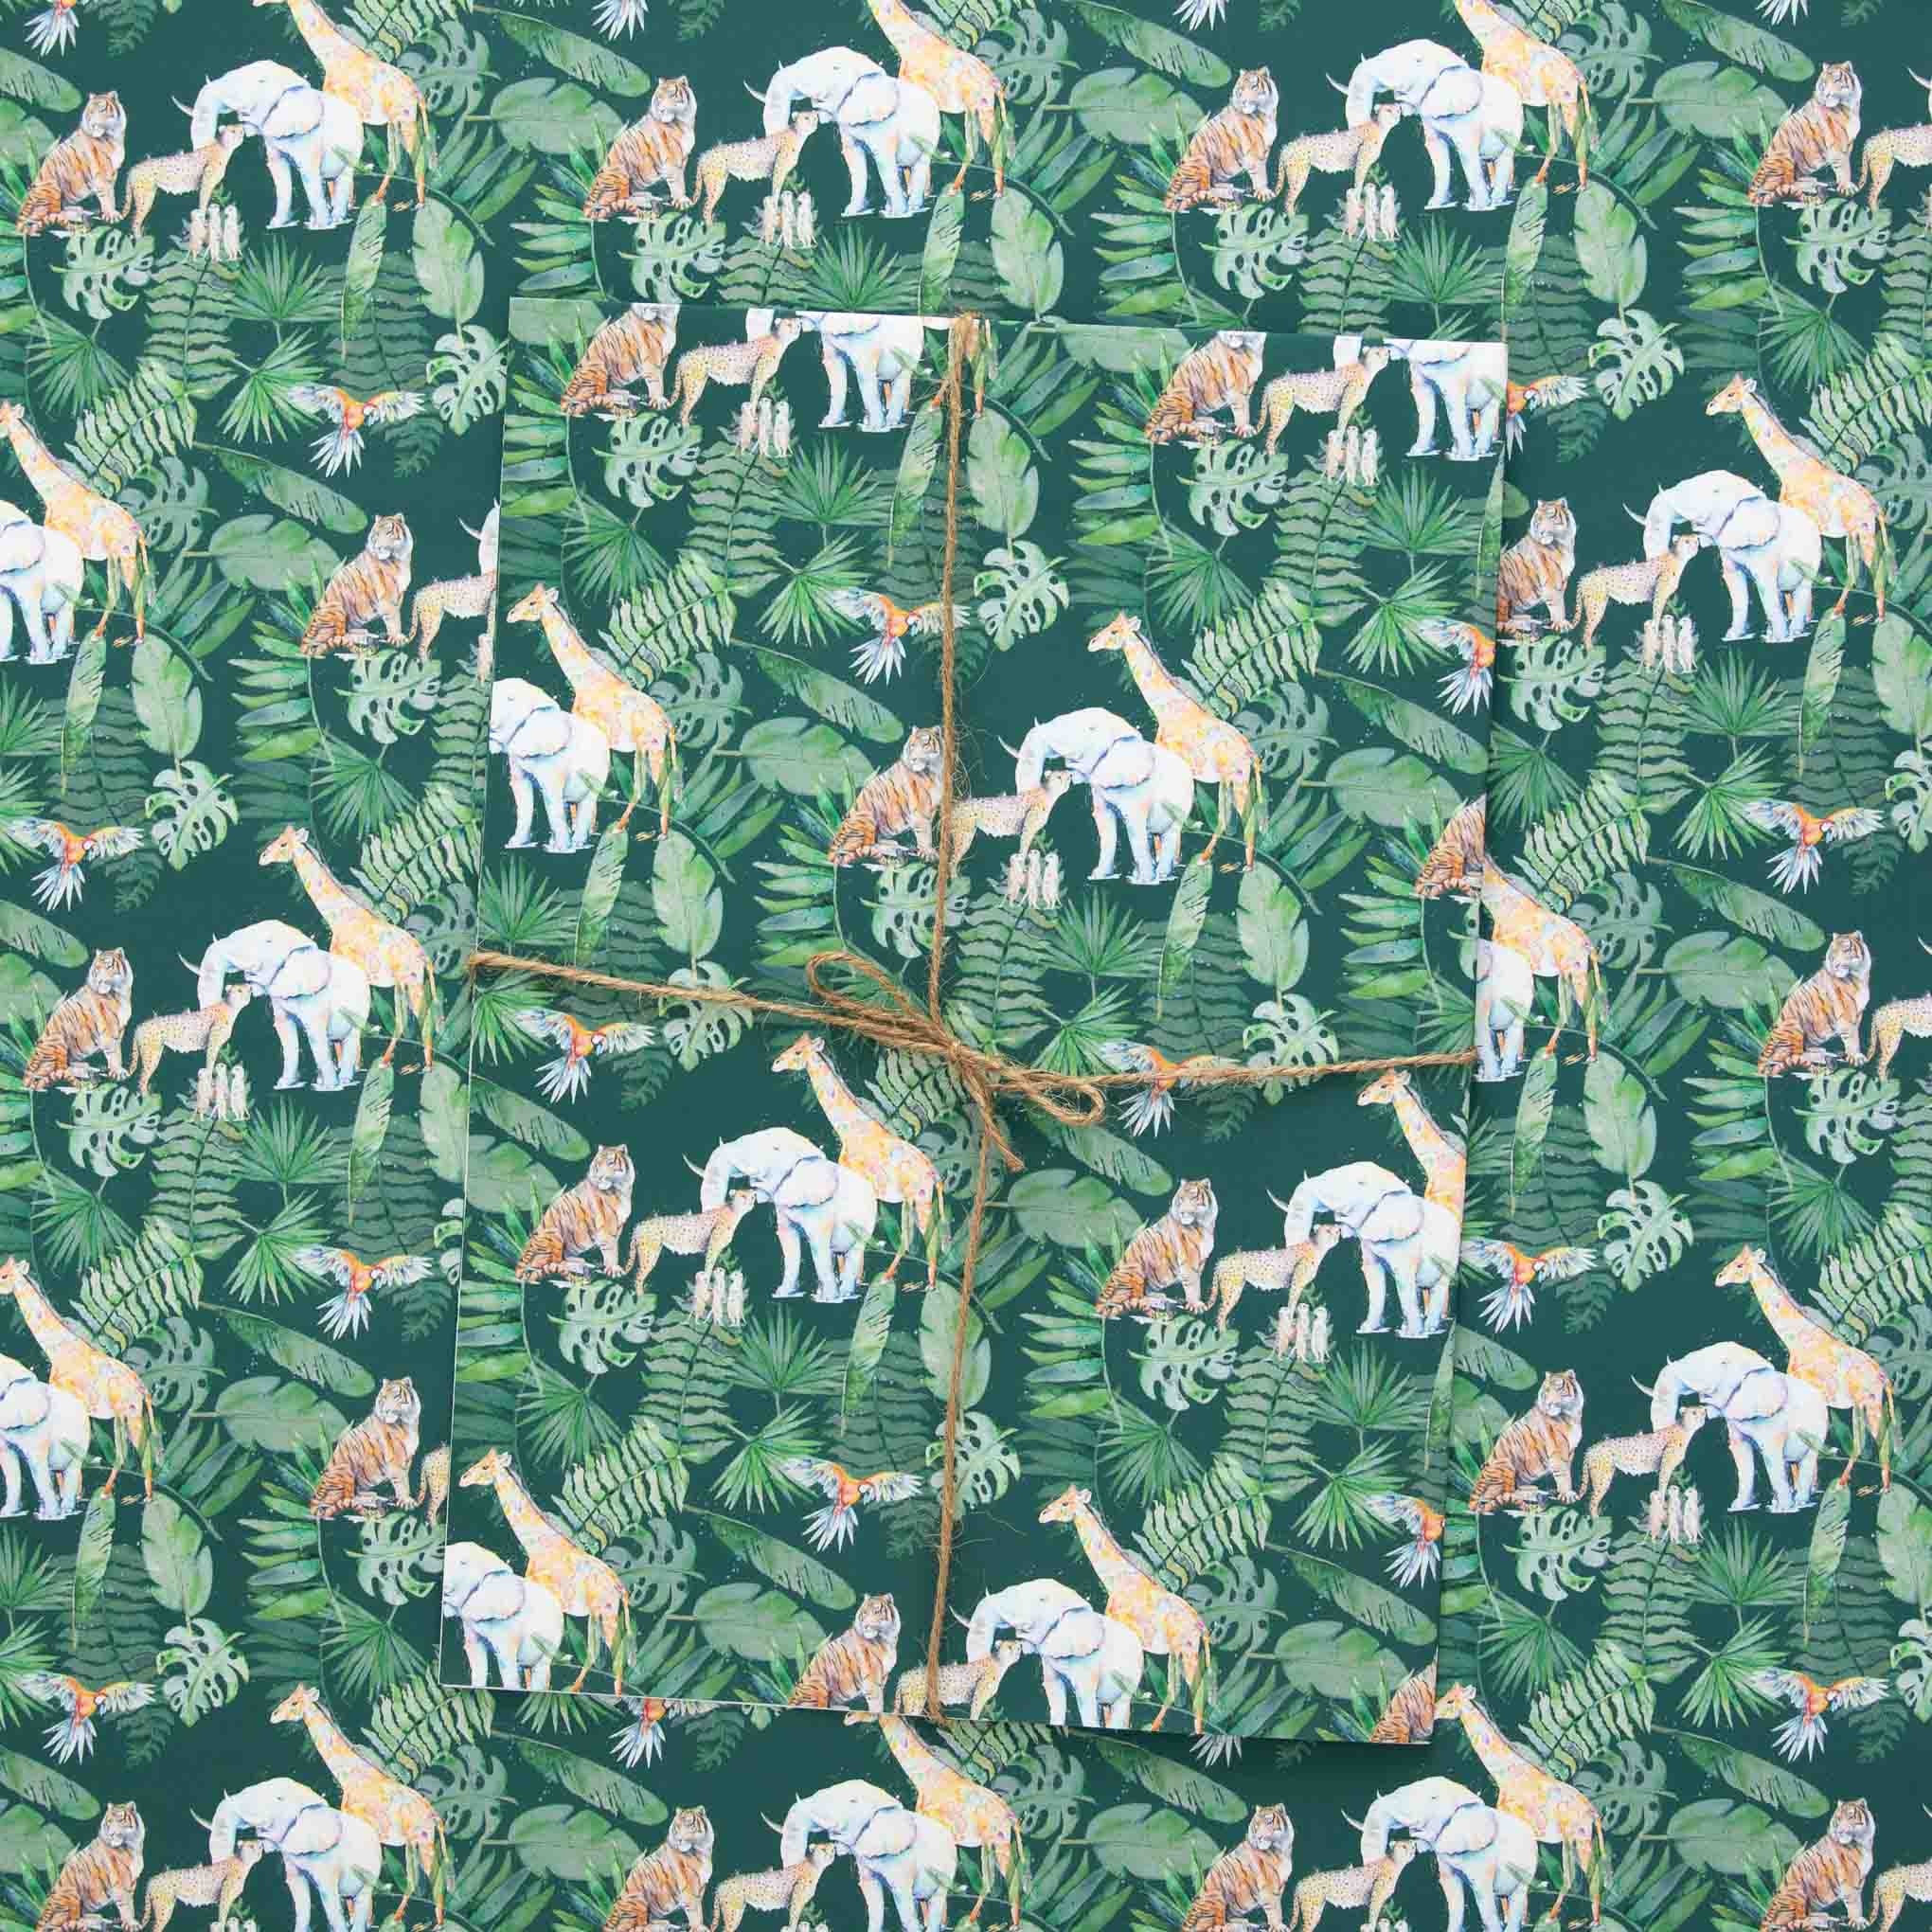 Jungle Animals Wrapping Paper